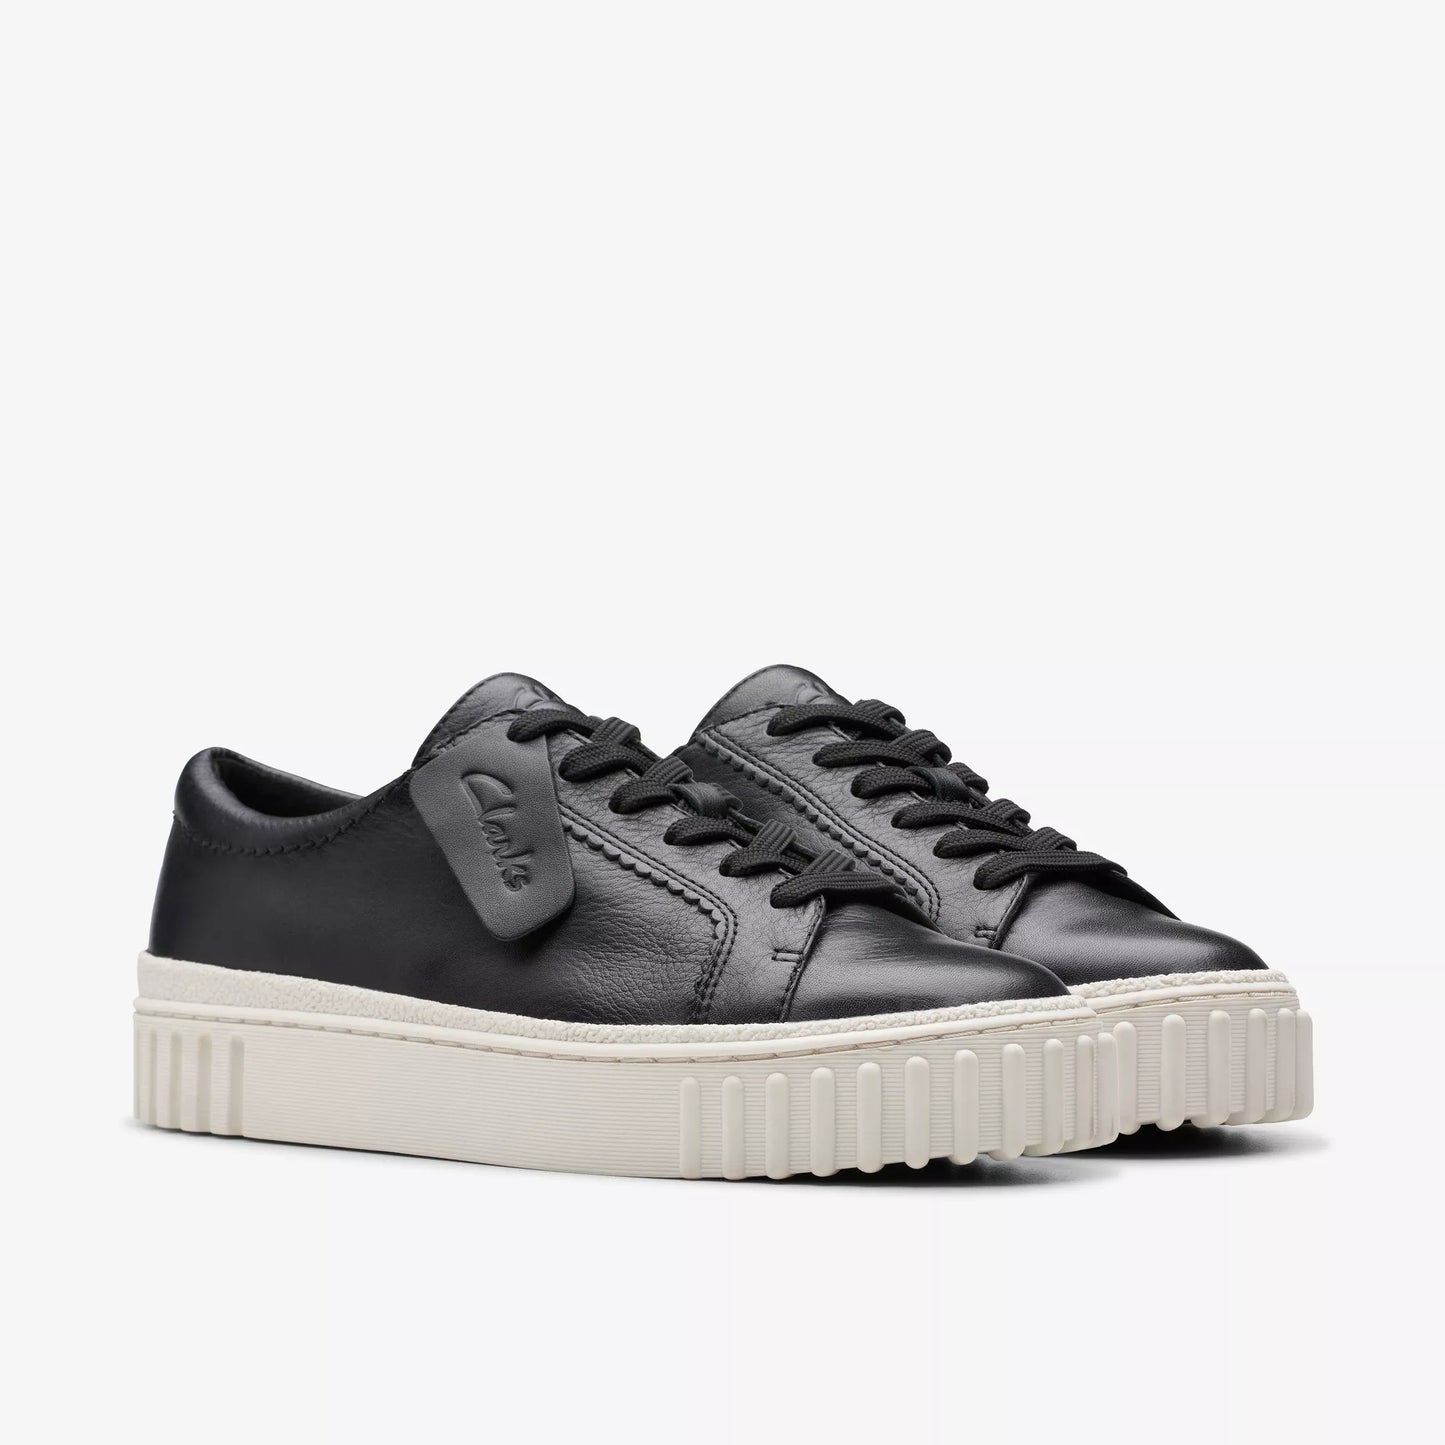 The black leather Mayhill Walk Sneaker by Clarks